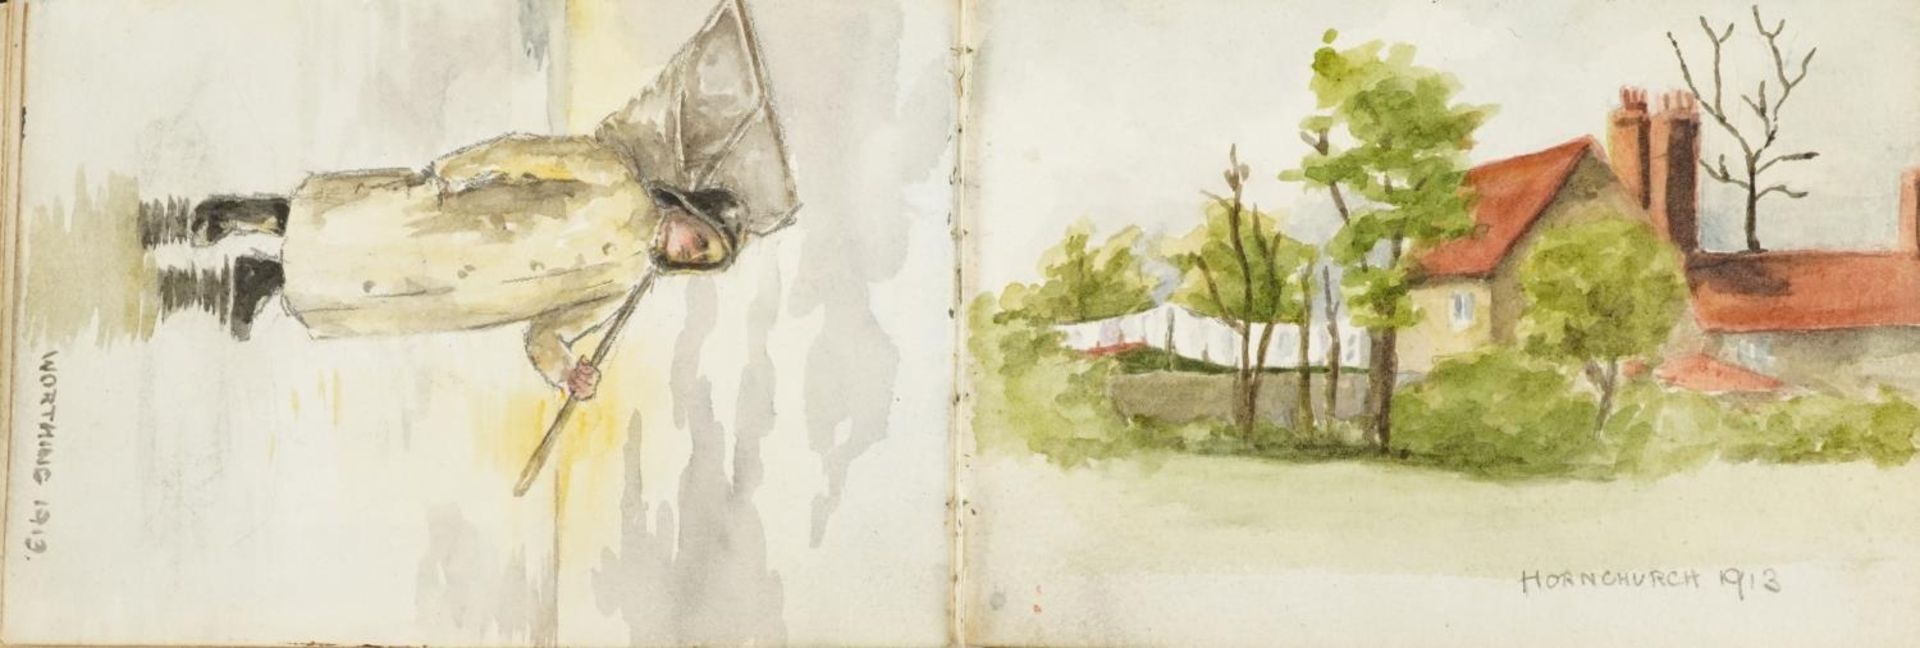 Early 20th century artist's travel sketchbook housing various watercolours and pencil sketches - Image 13 of 15